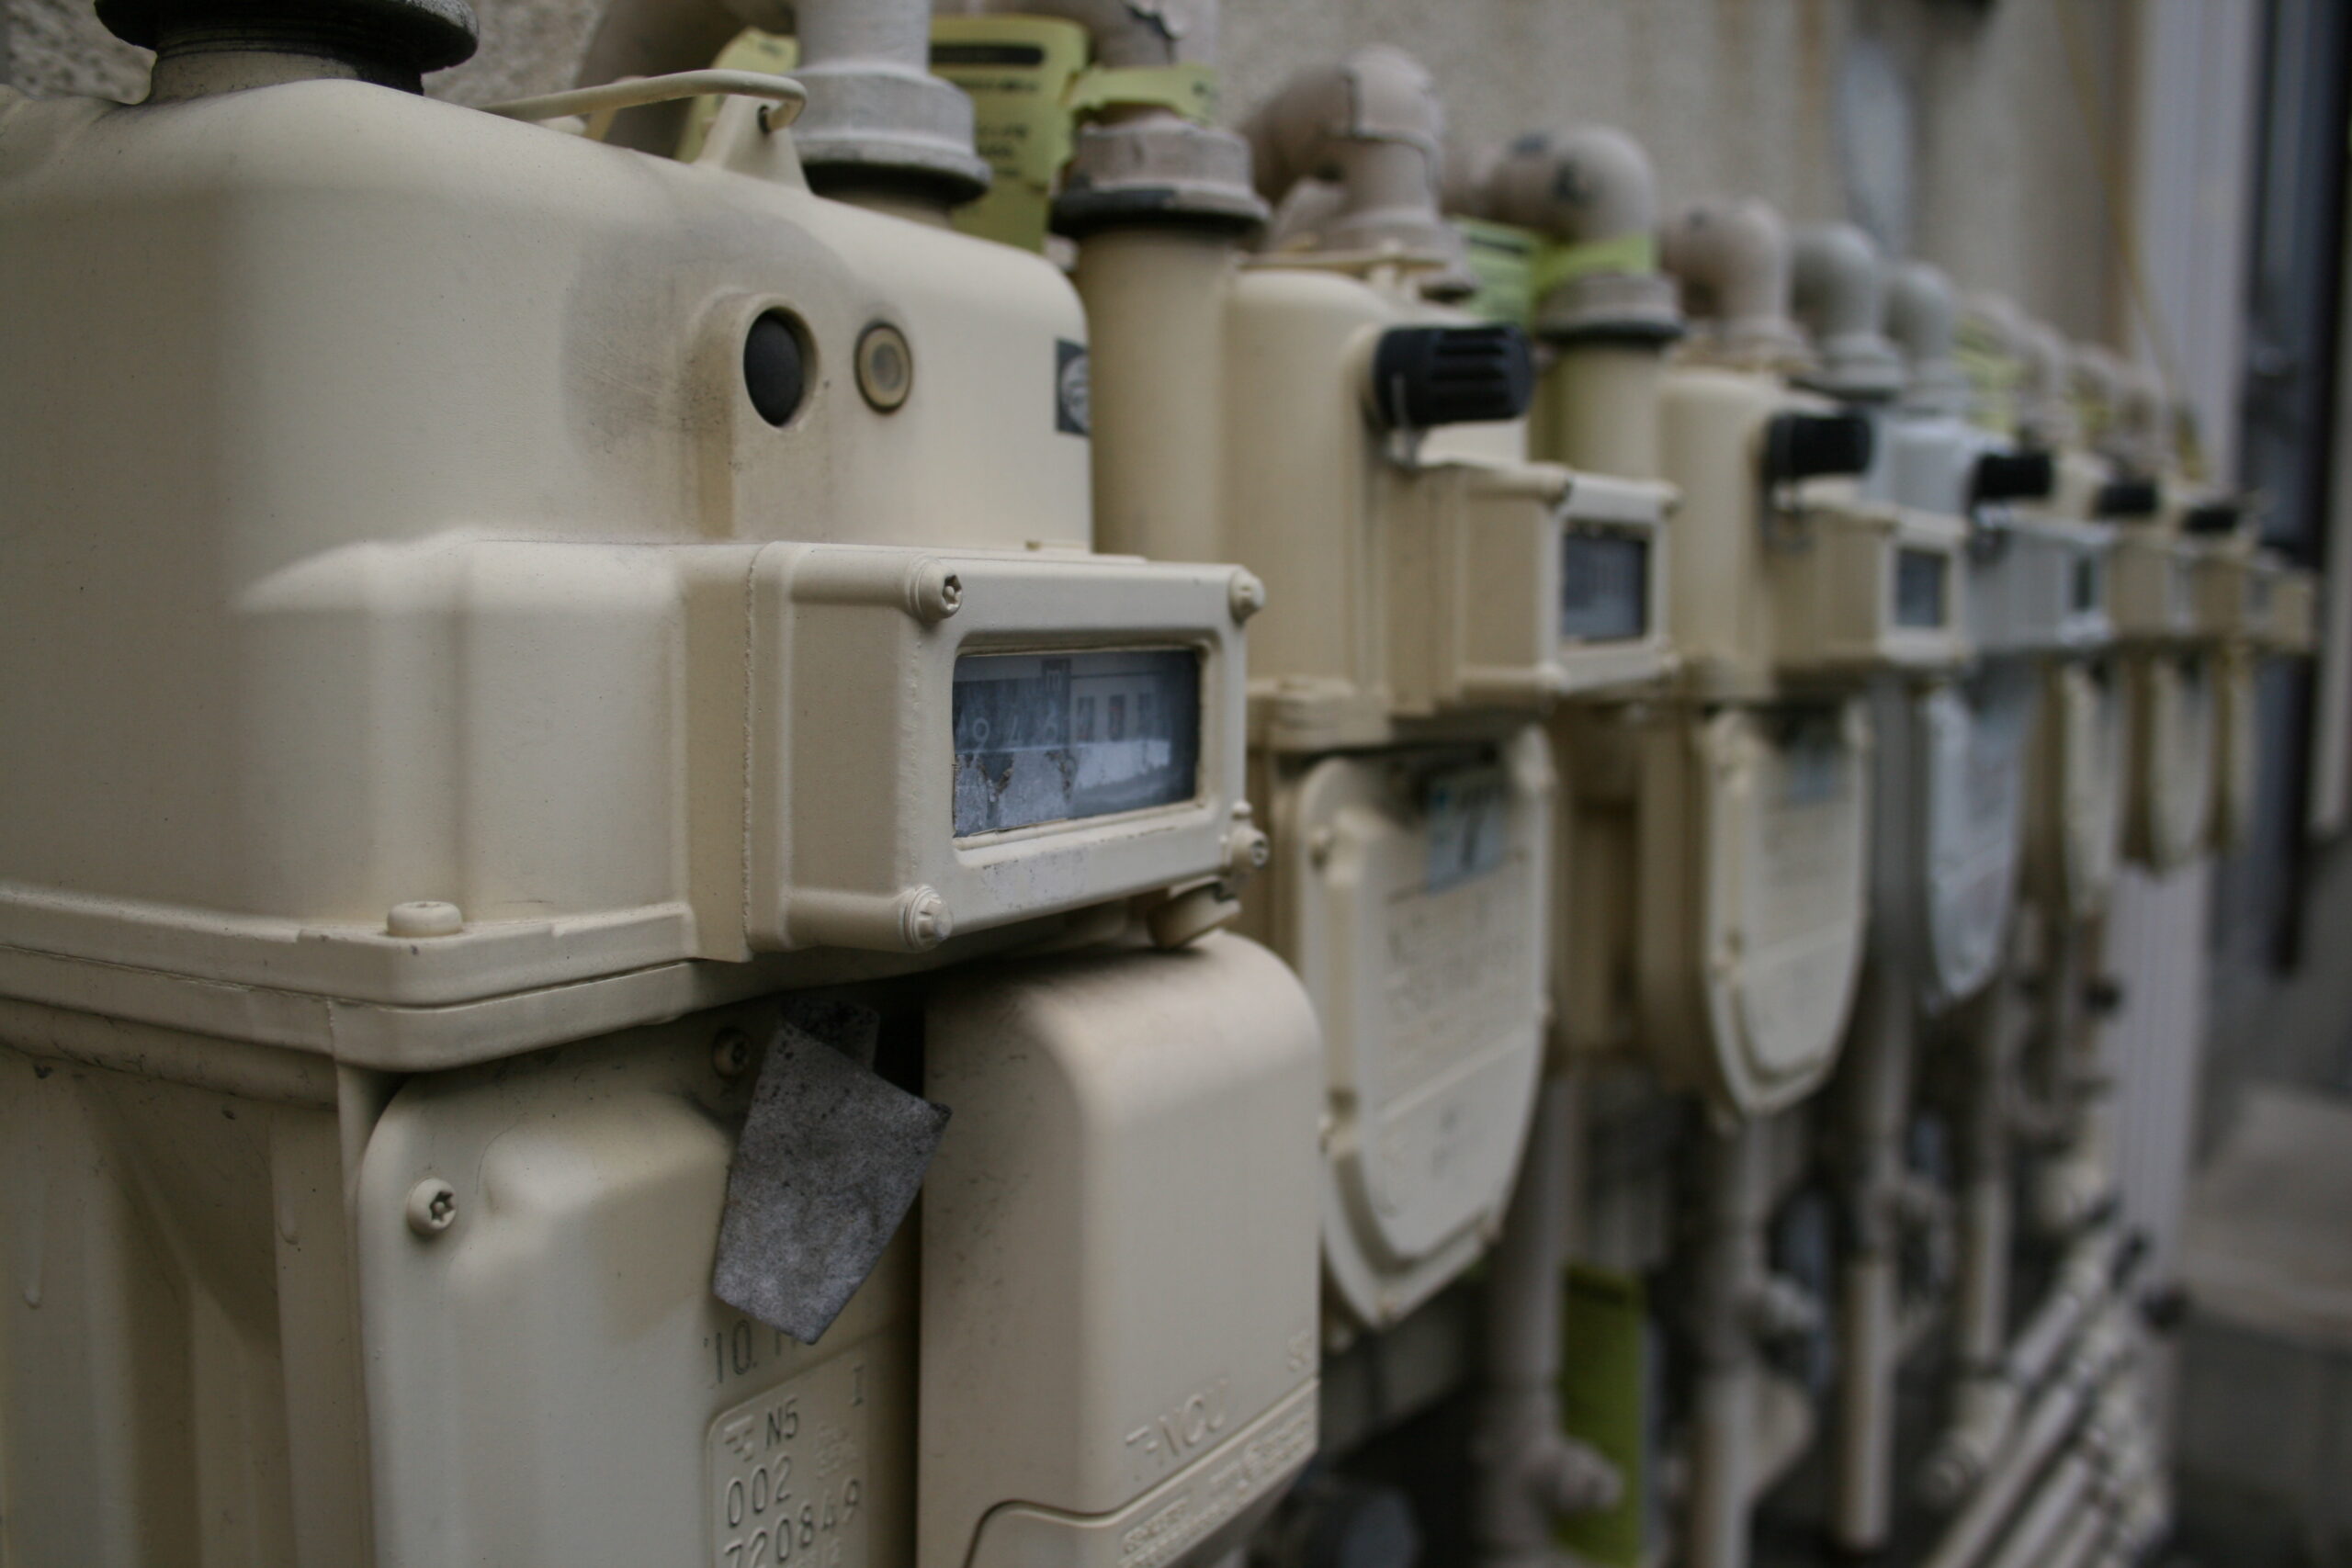 a row of gas meters on a wall